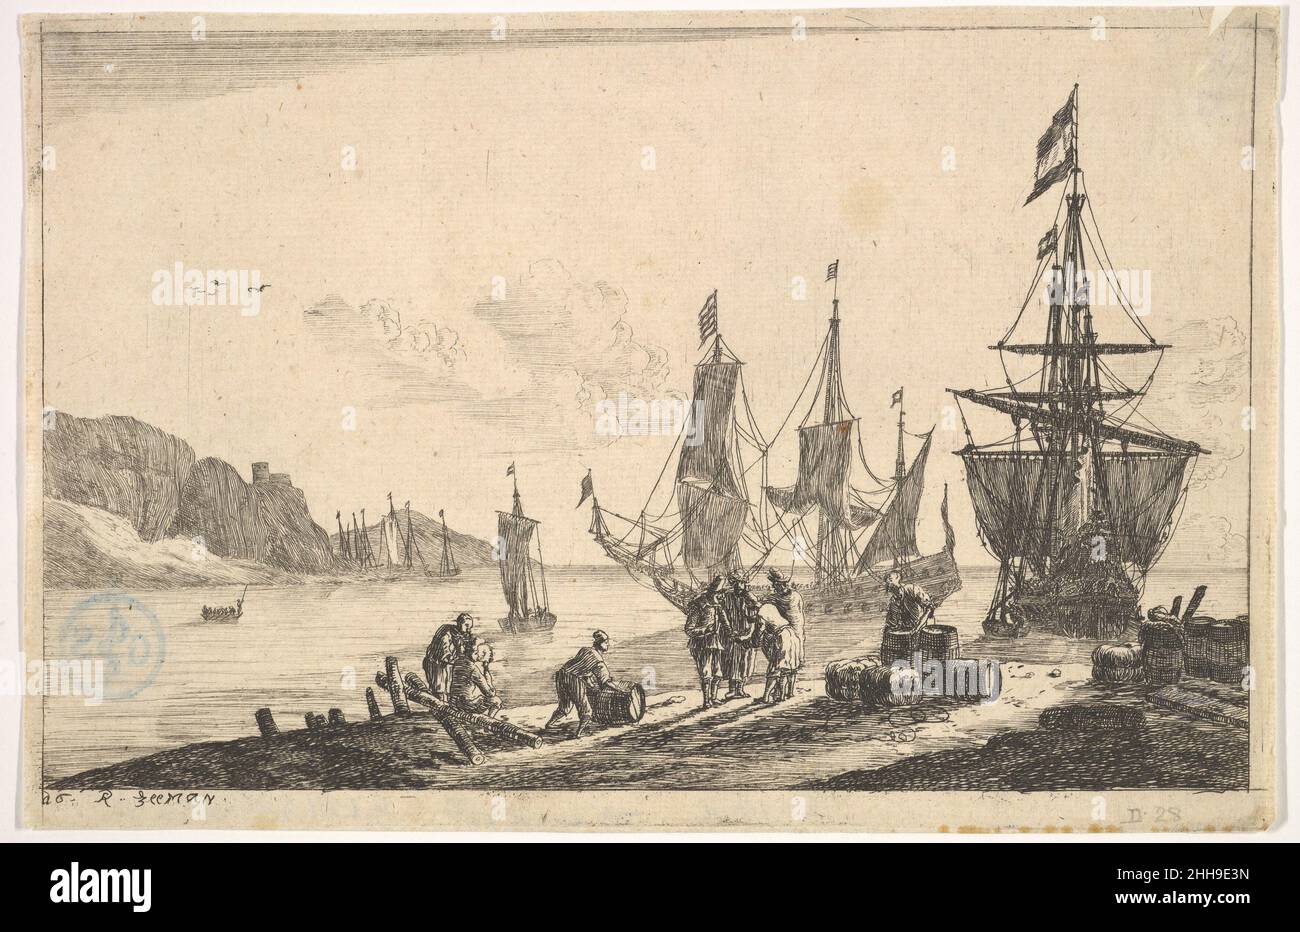 Bay with Sailing Vessels 17th century Reinier Nooms, called Zeeman Dutch. Bay with Sailing Vessels  380679 Artist: Reinier Nooms, called Zeeman, Dutch, Amsterdam ca. 1623?1664 Amsterdam, Bay with Sailing Vessels, 17th century, Etching; state II, sheet: 5 1/4 x 8 1/16 in. (13.4 x 20.5 cm). The Metropolitan Museum of Art, New York. Bequest of Grace M. Pugh, 1985 (1986.1180.1415) Stock Photo